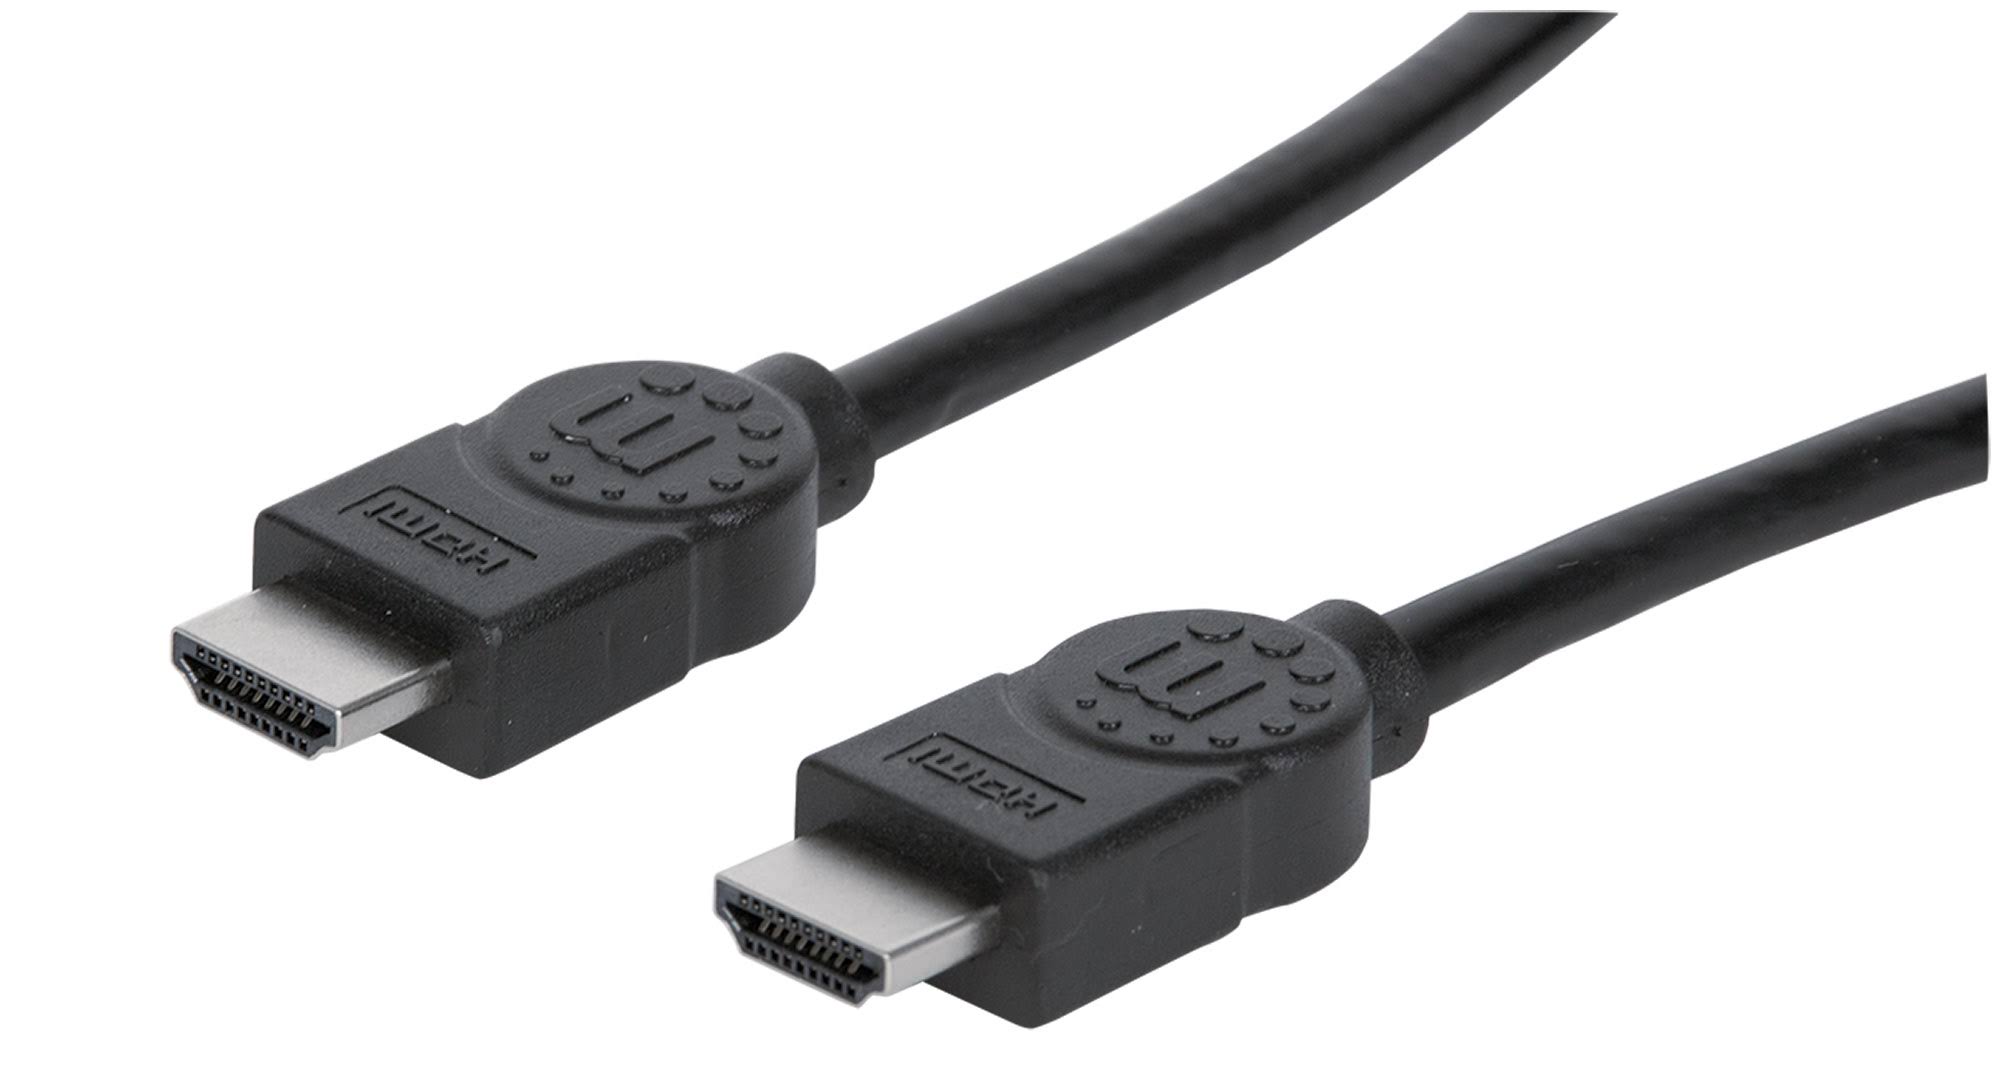  Manhattan High Speed HDMI Cable with Ethernet Channel (2m)